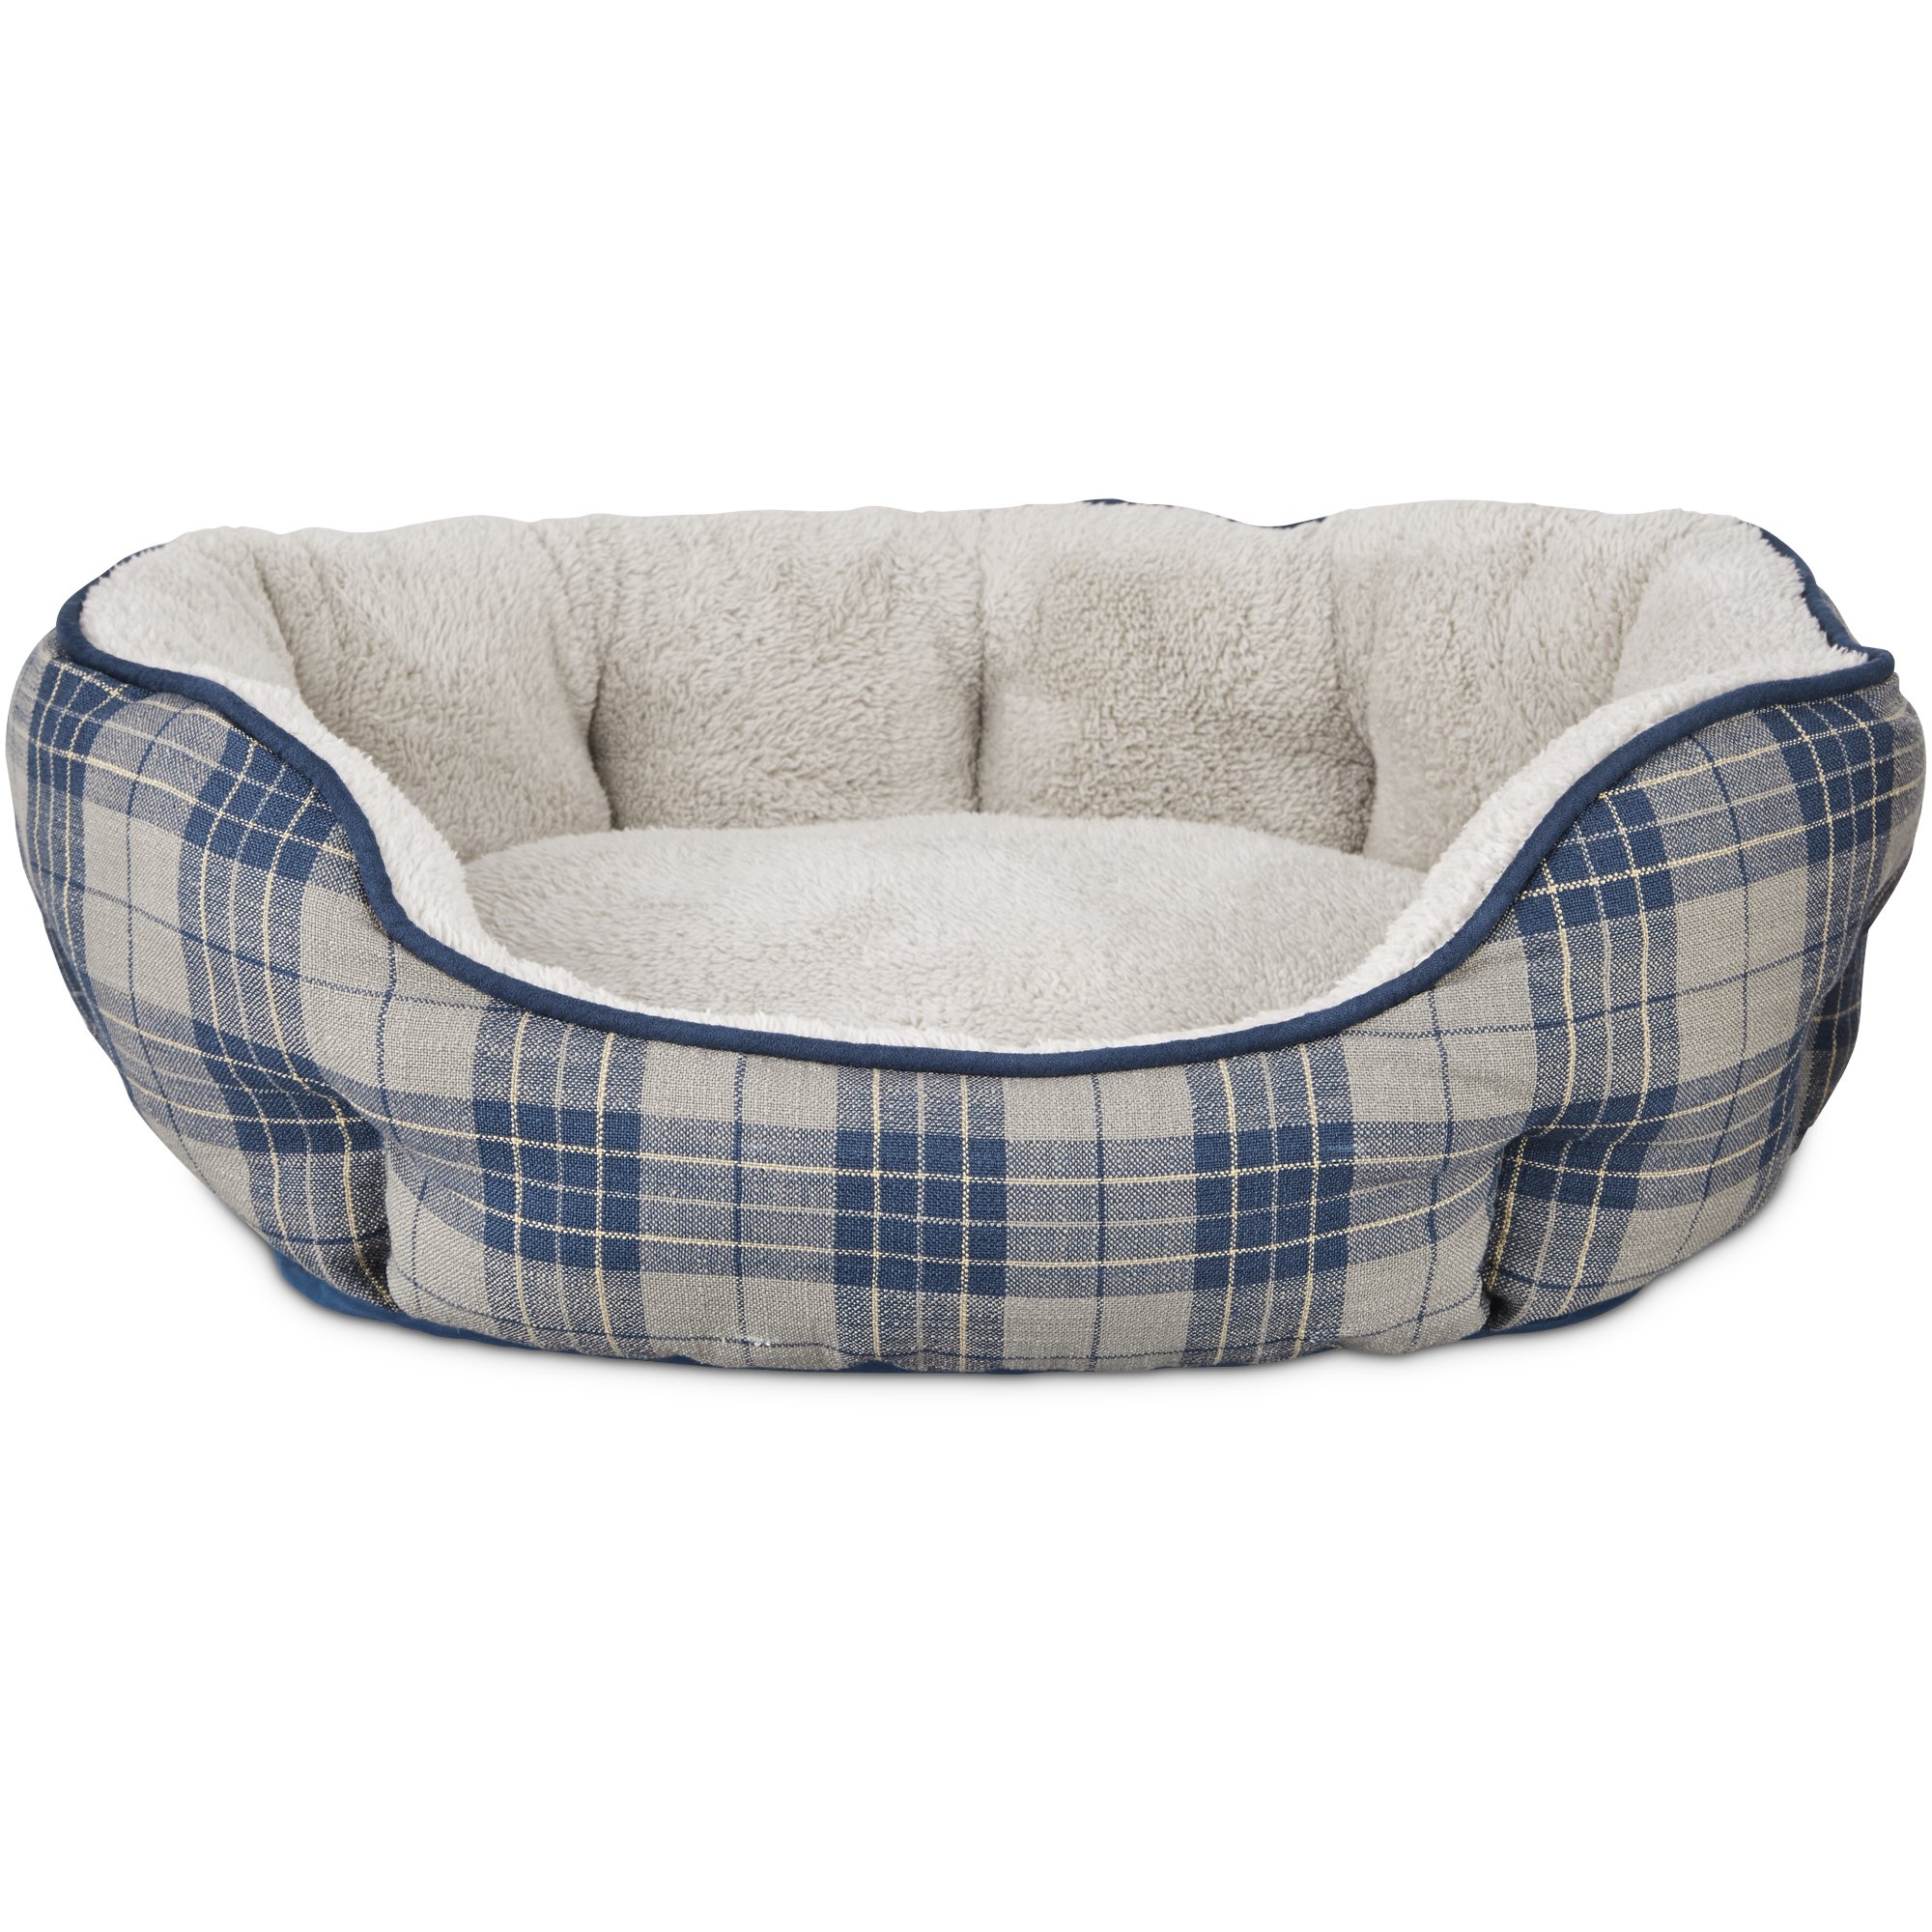 Harmony Nester Dog Bed in Blue Plaid 